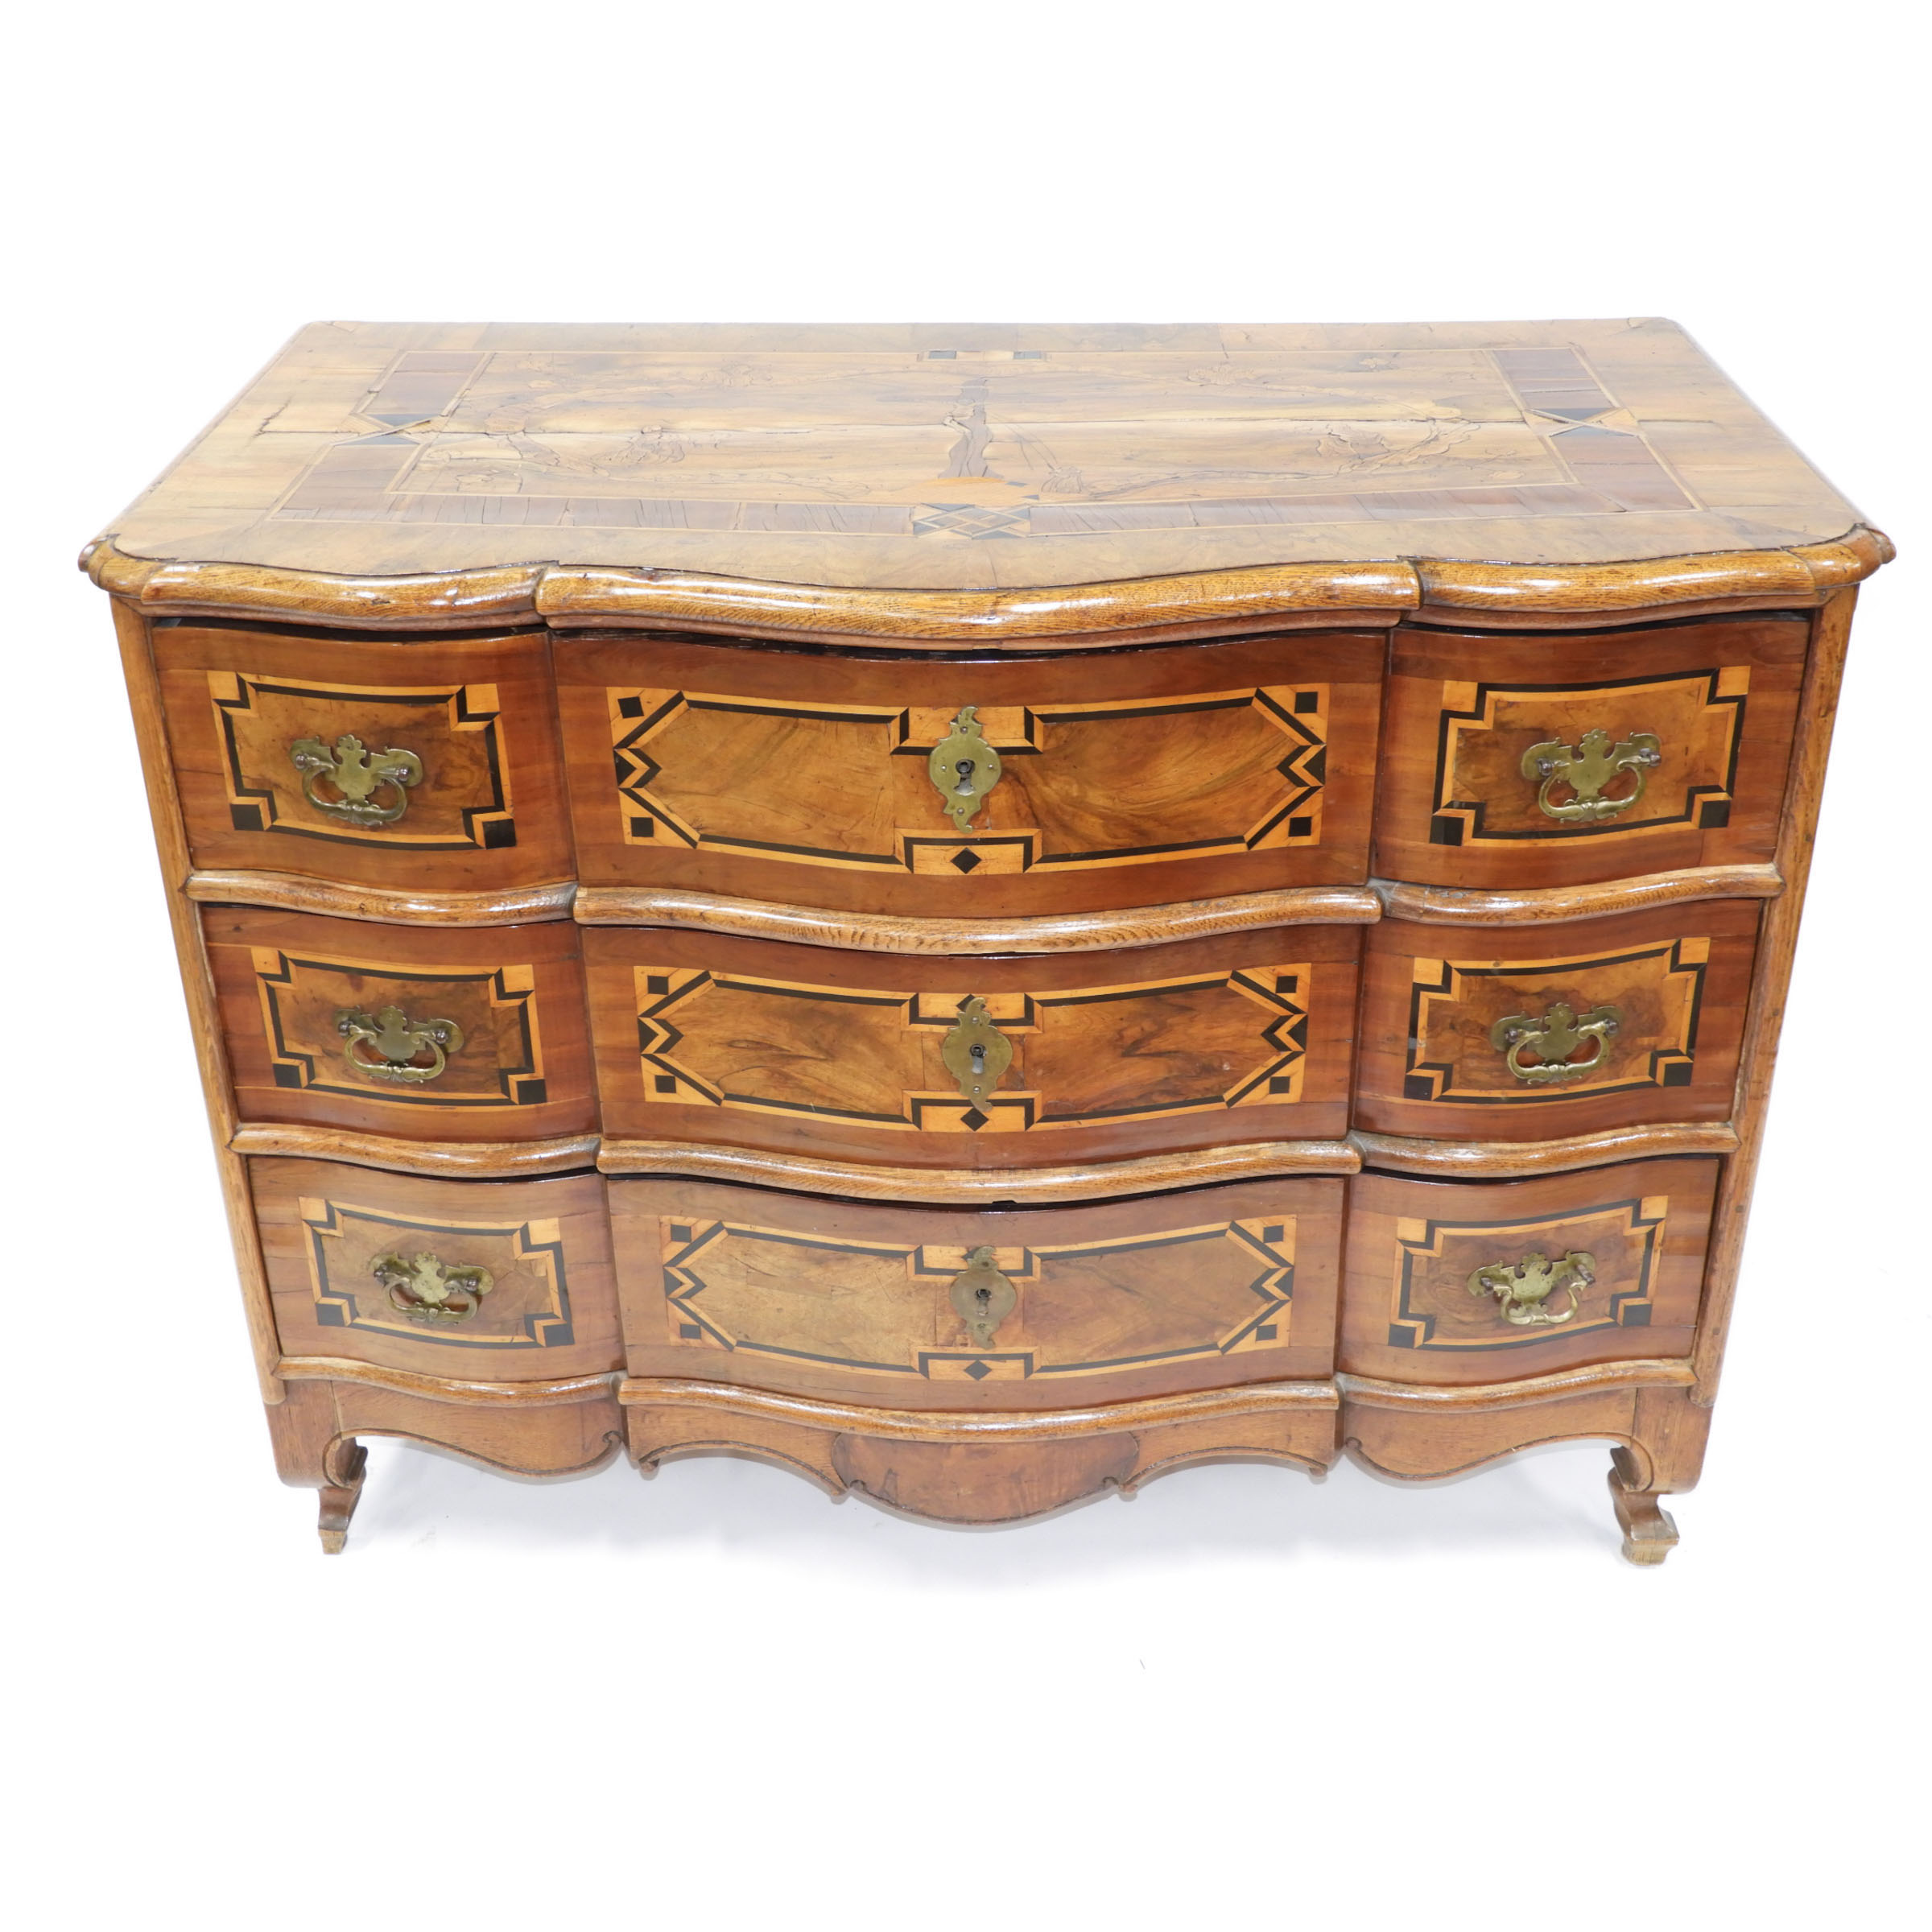 German Serpentine Front Mixed Wood Inlaid Chest of Drawers, 18th century